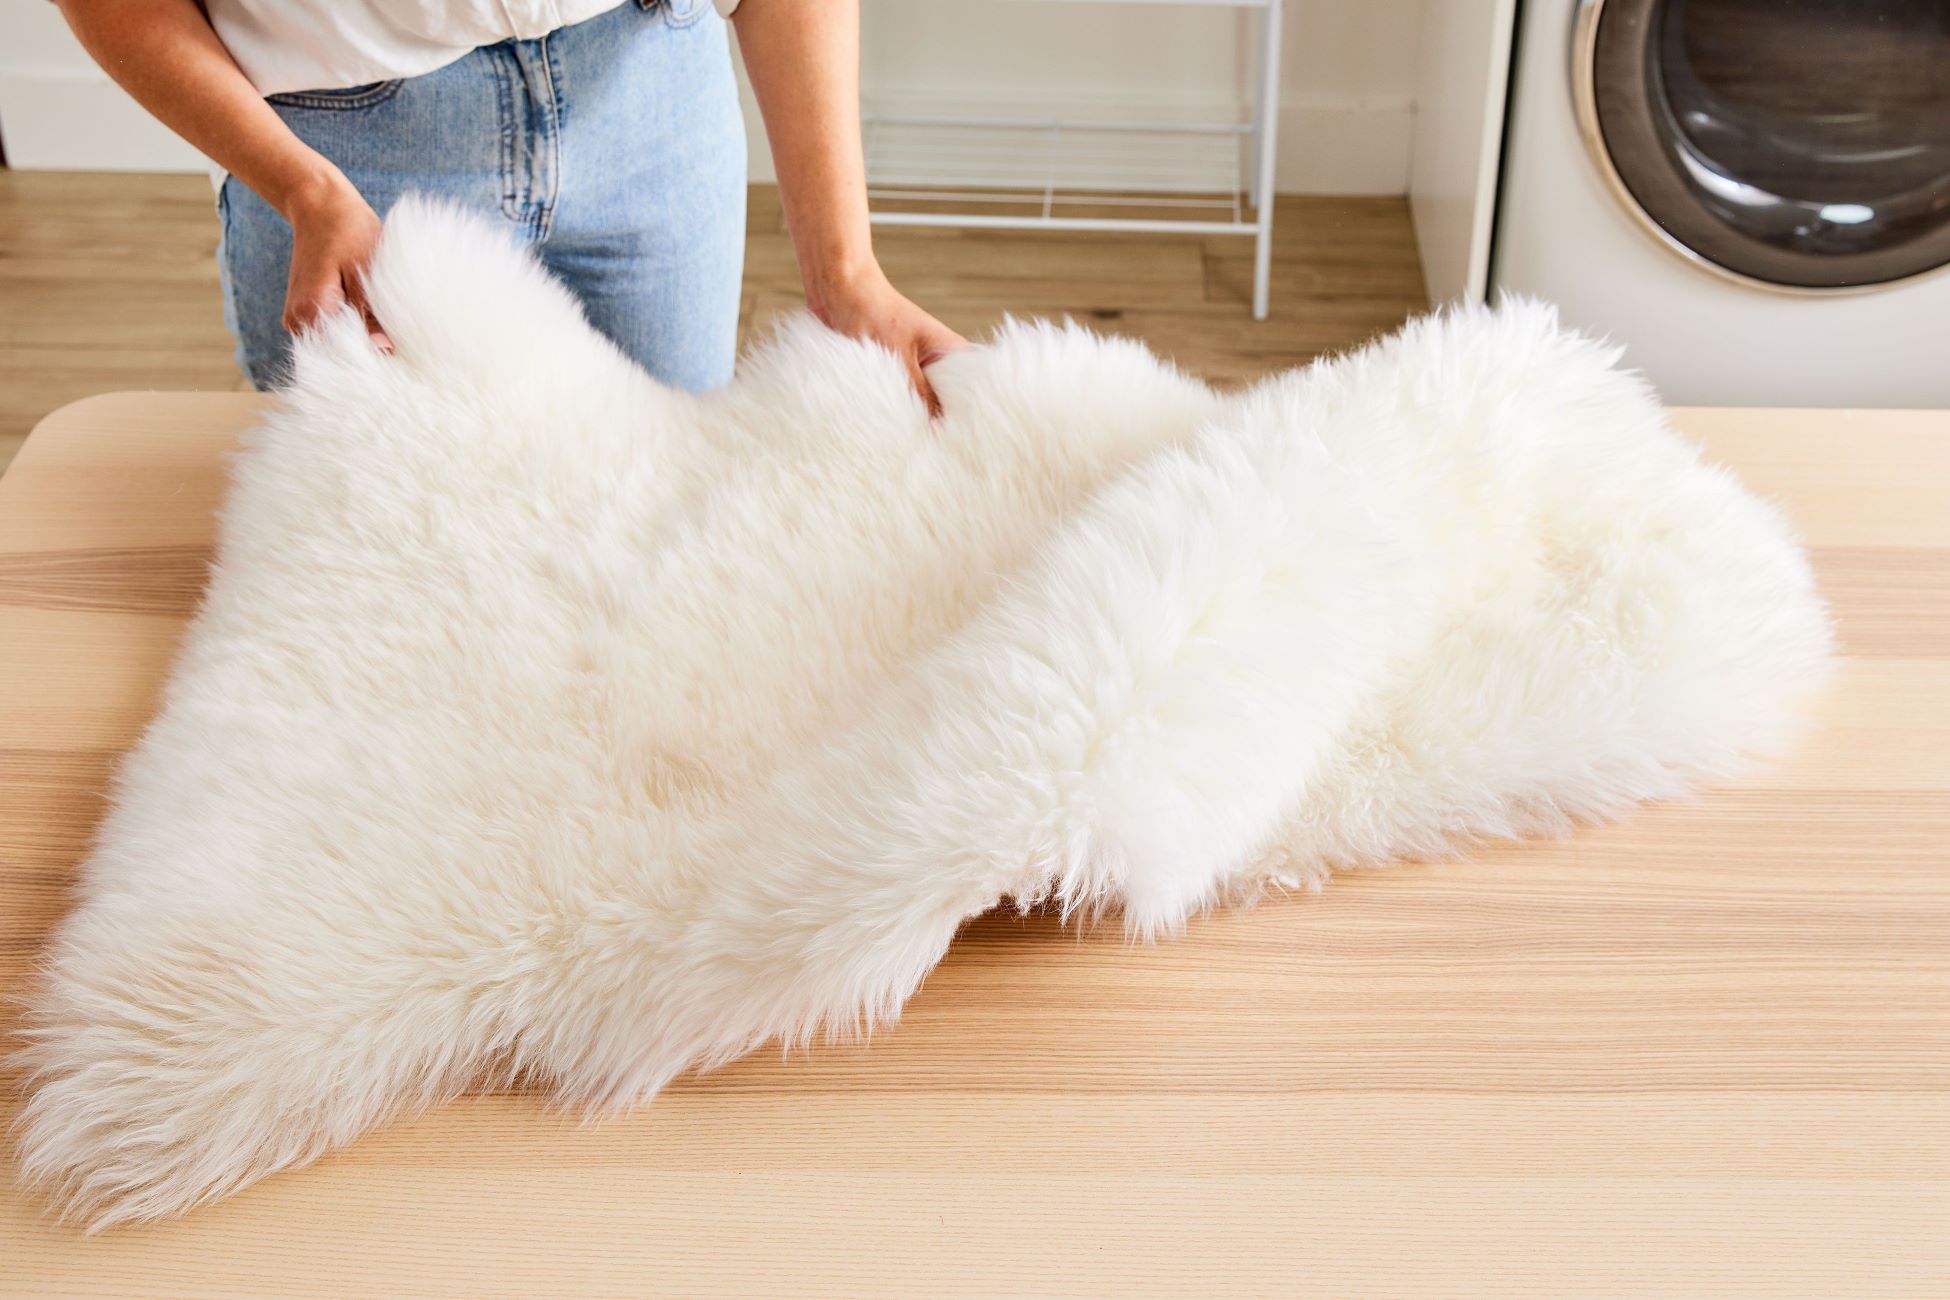 How To Wash A Fur Rug In The Washing Machine